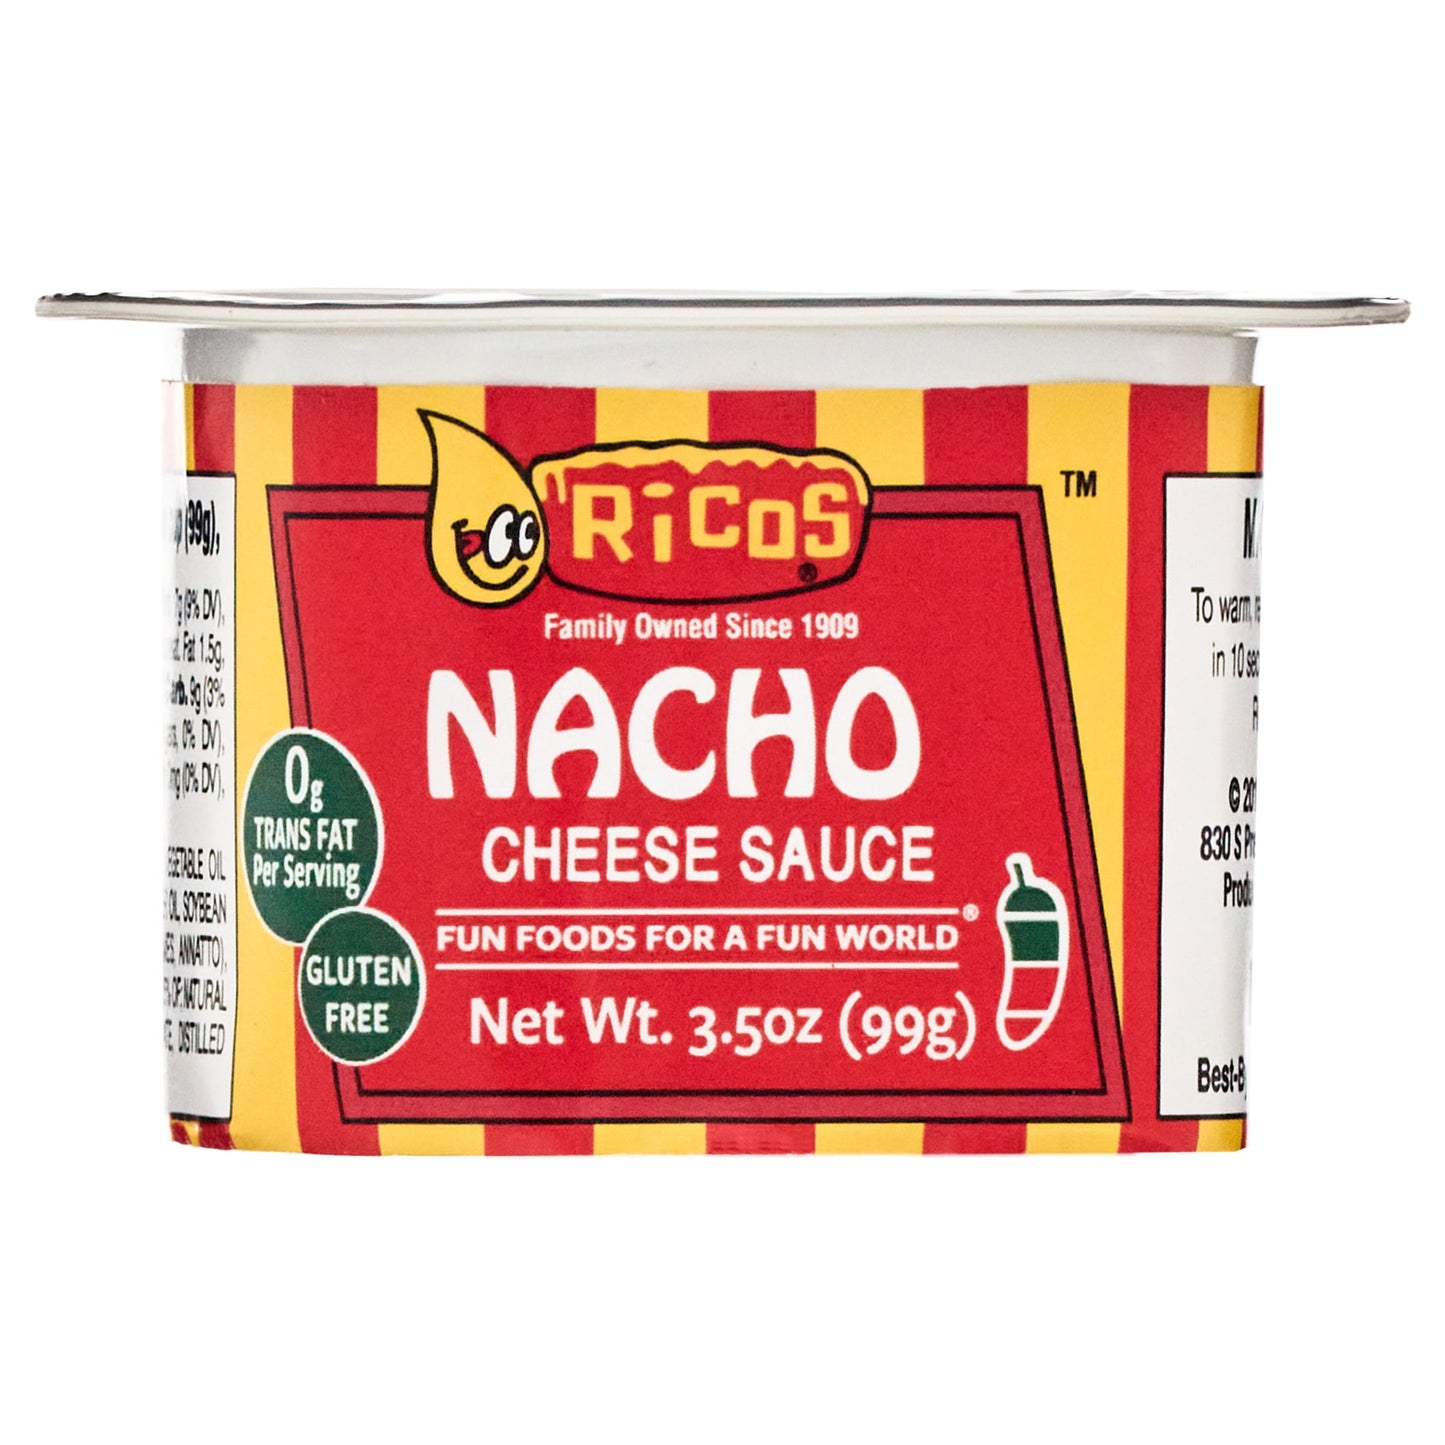 ® Nacho Cheese Sauce 3.5Oz Cup, 4 Count, Shelf-Stable